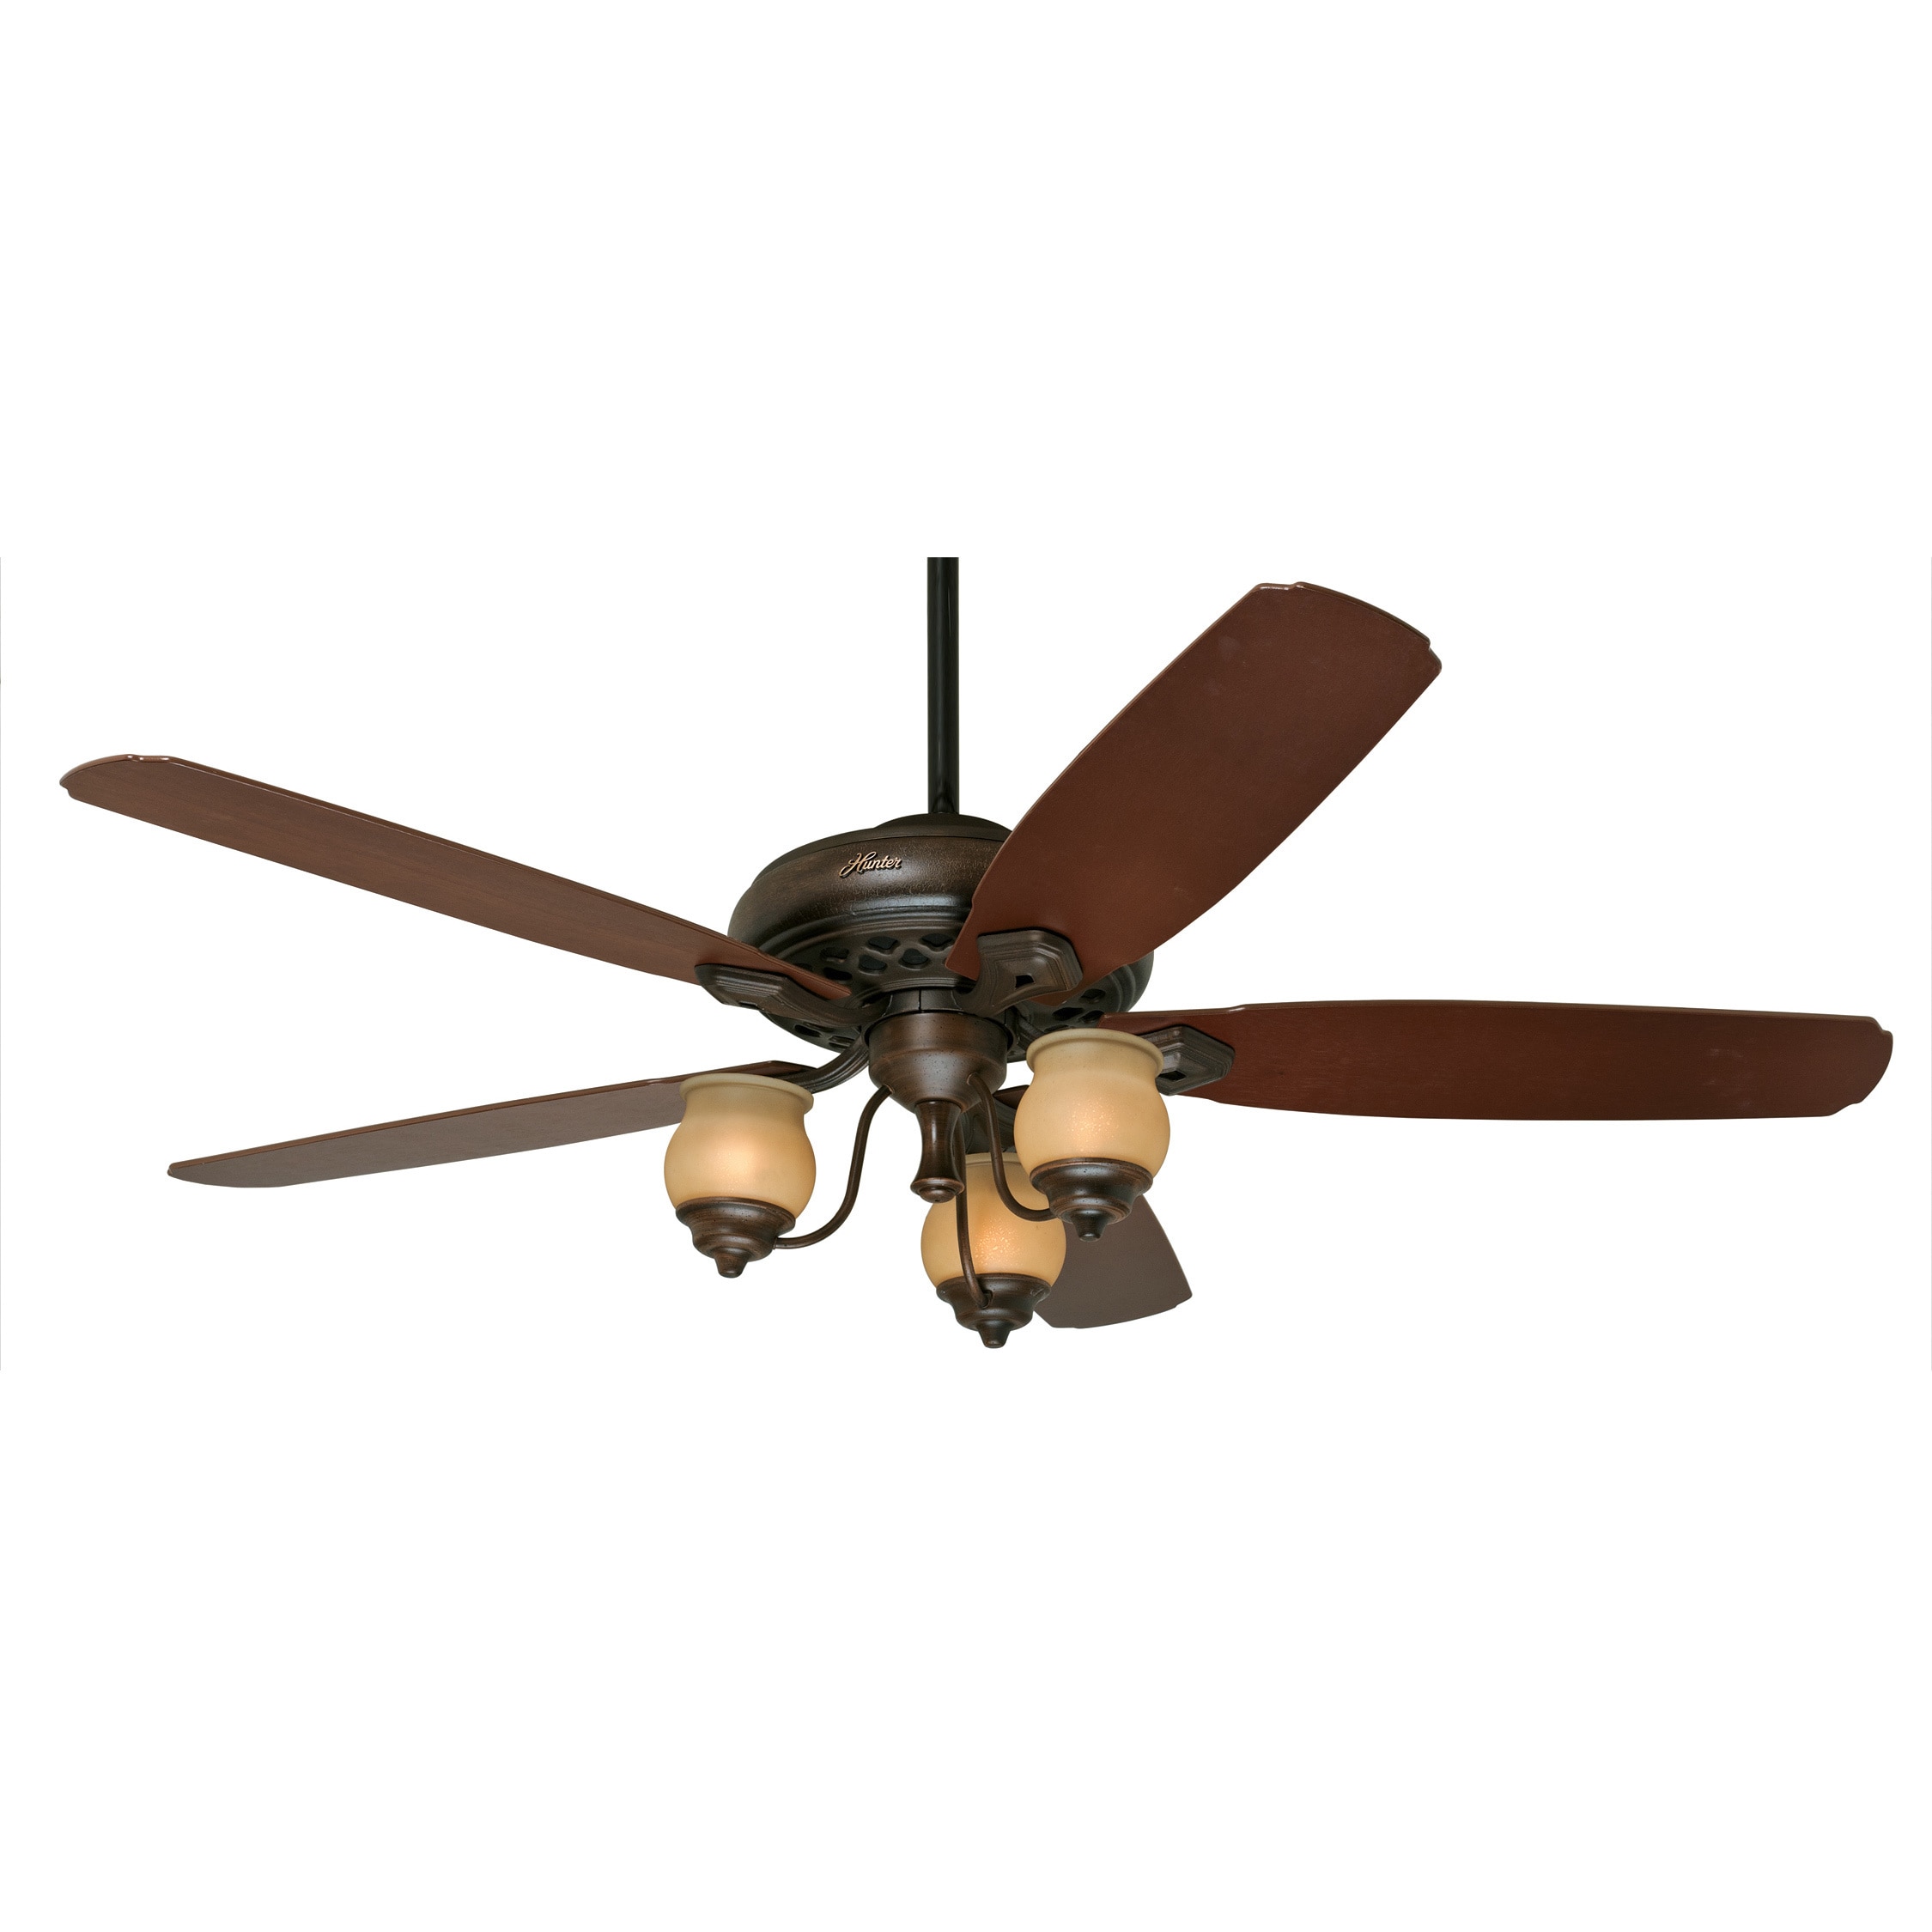 Torrence Provence 64 inch Ceiling Fan With Five Mahogany/ Dark Walnut Blades